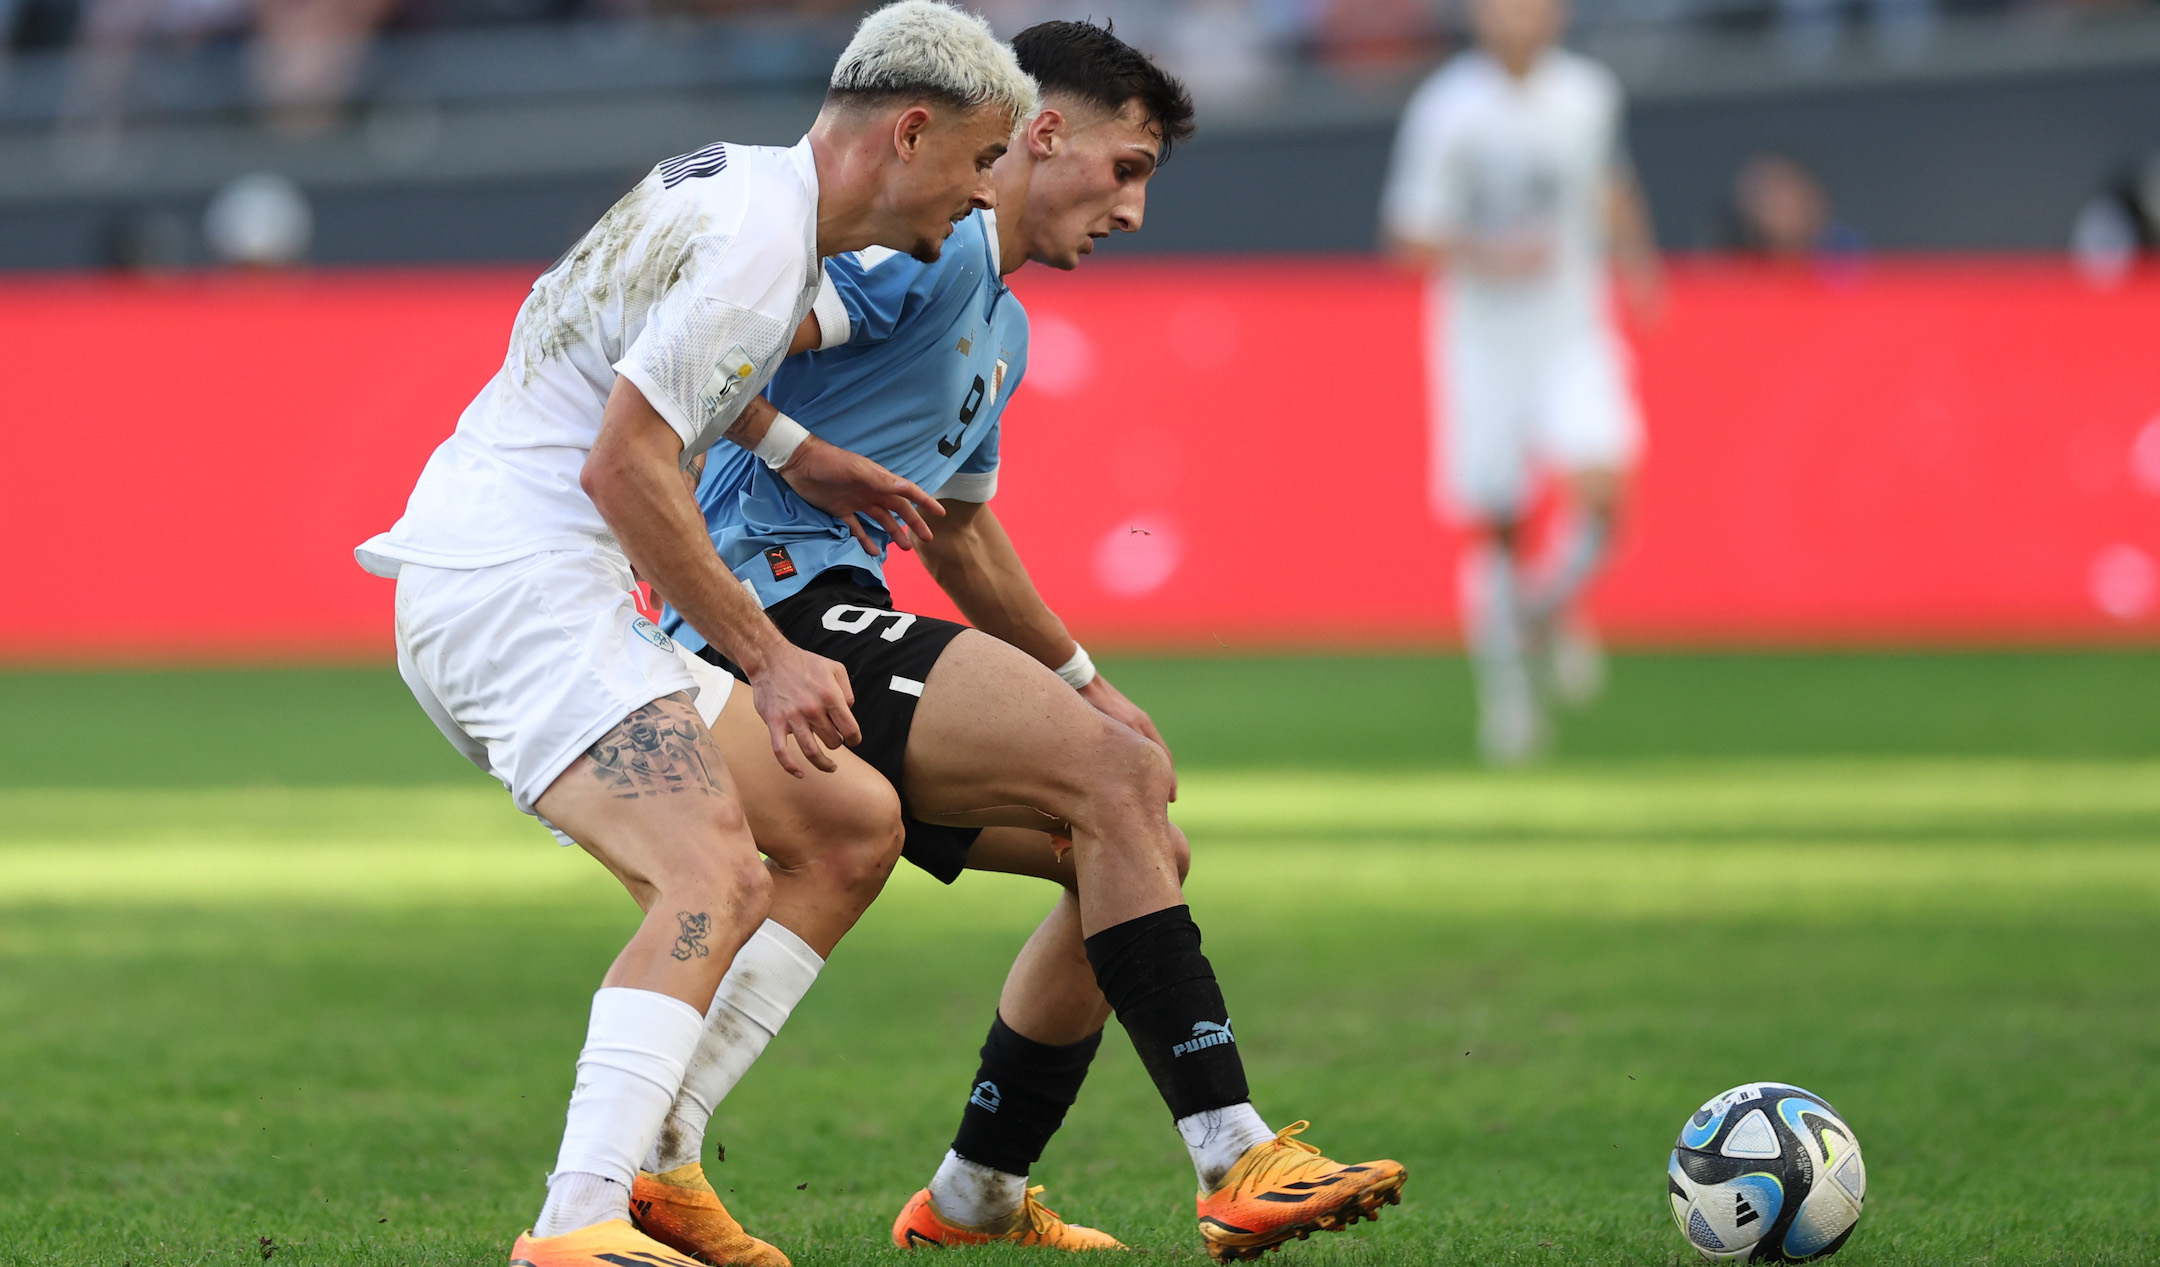 Stav Lemkin of Israel, left, battles for the ball with Andres Ferrari of Uruguay during the FIFA U-20 World Cup semifinal at Estadio La Plata in La Plata, Argentina, June 8, 2023. (Tim Nwachukwu/FIFA via Getty Images)